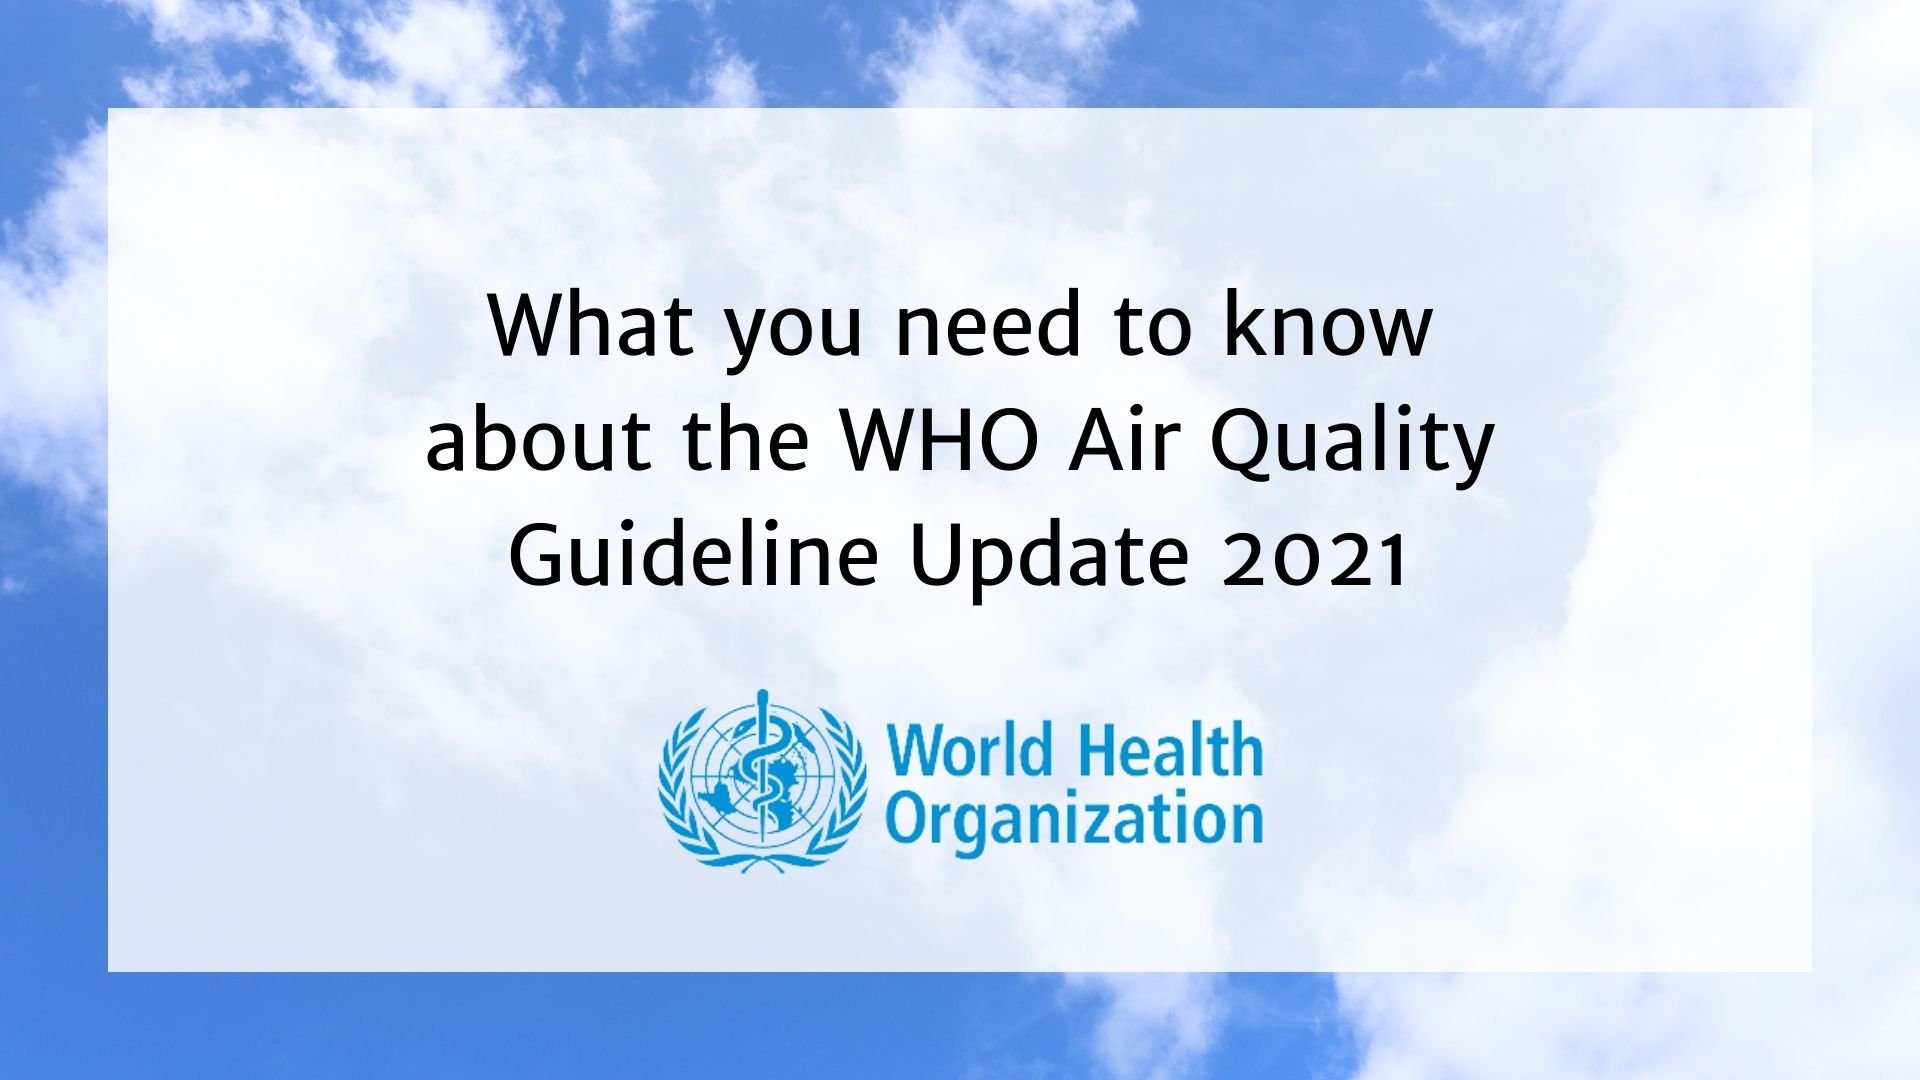 WHO Air Quality Guidelines 2021